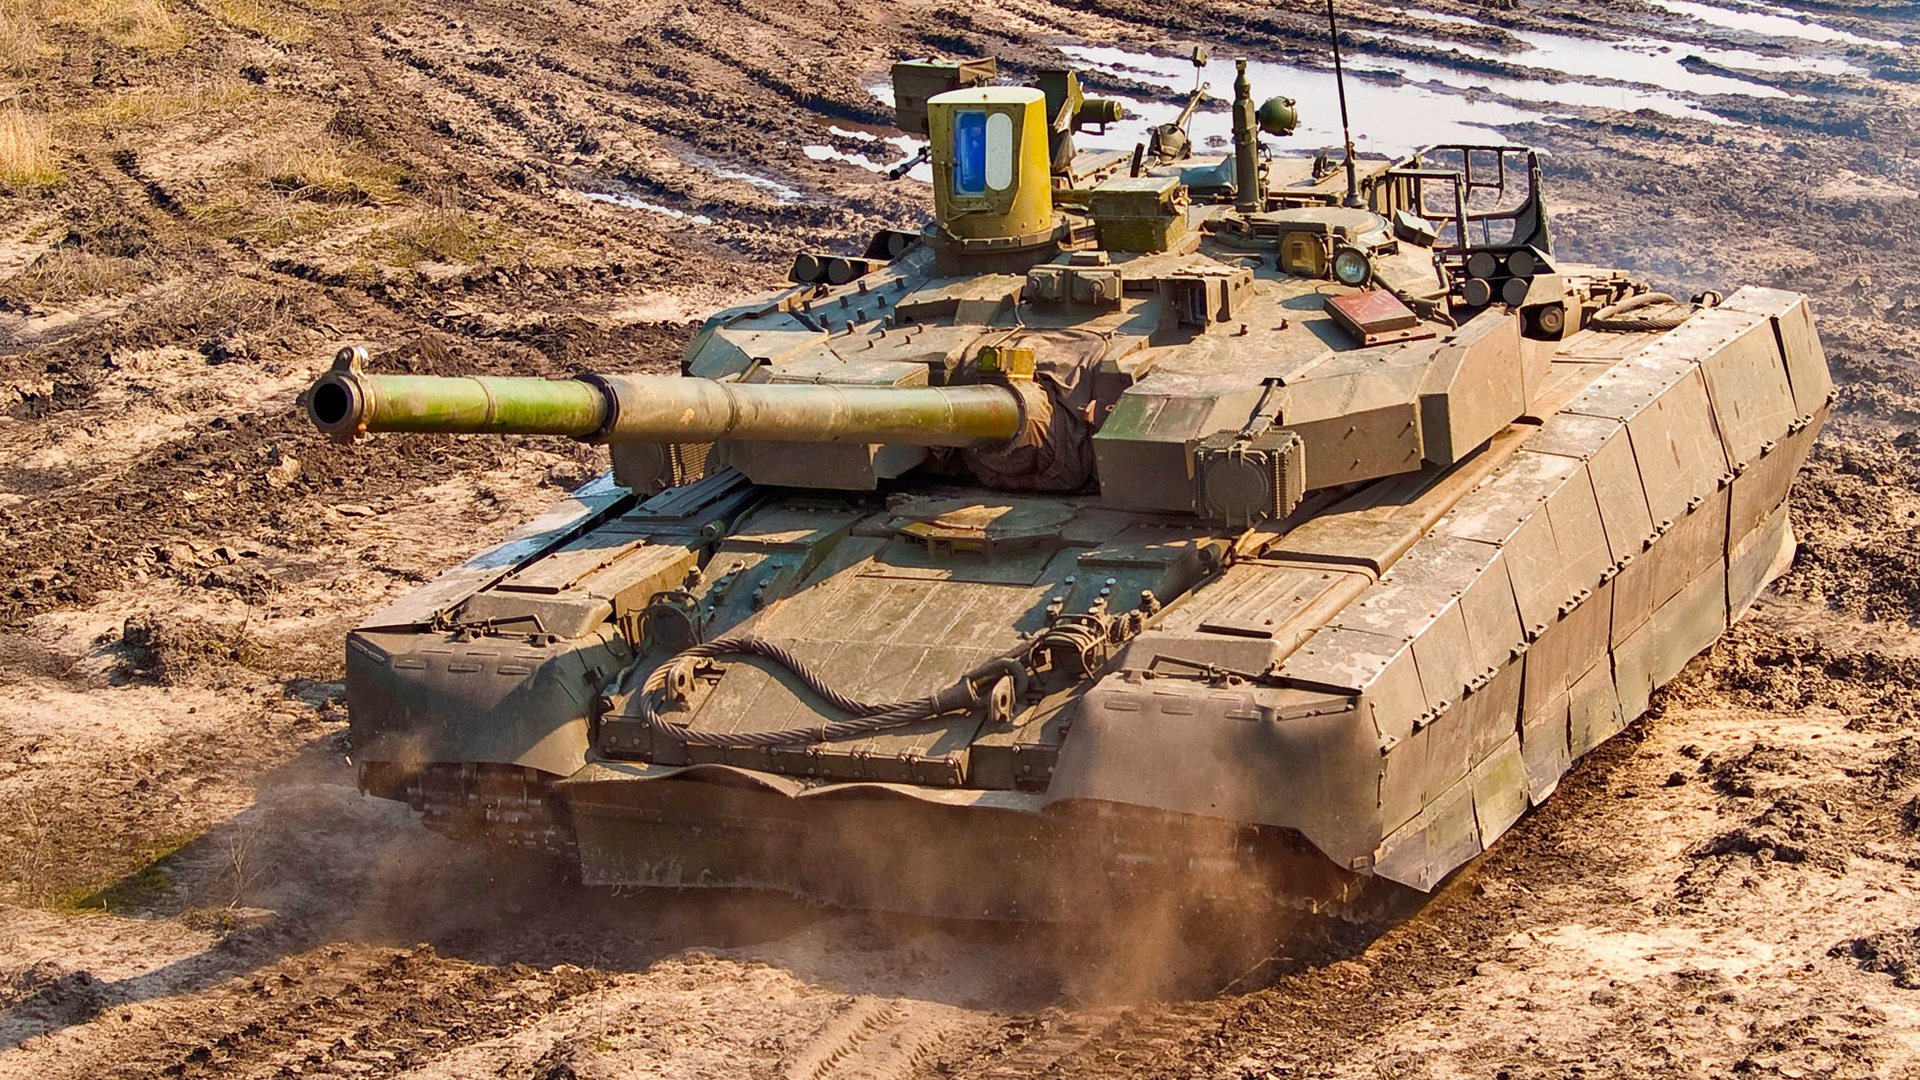 ukraine army tank images hd wallpapers